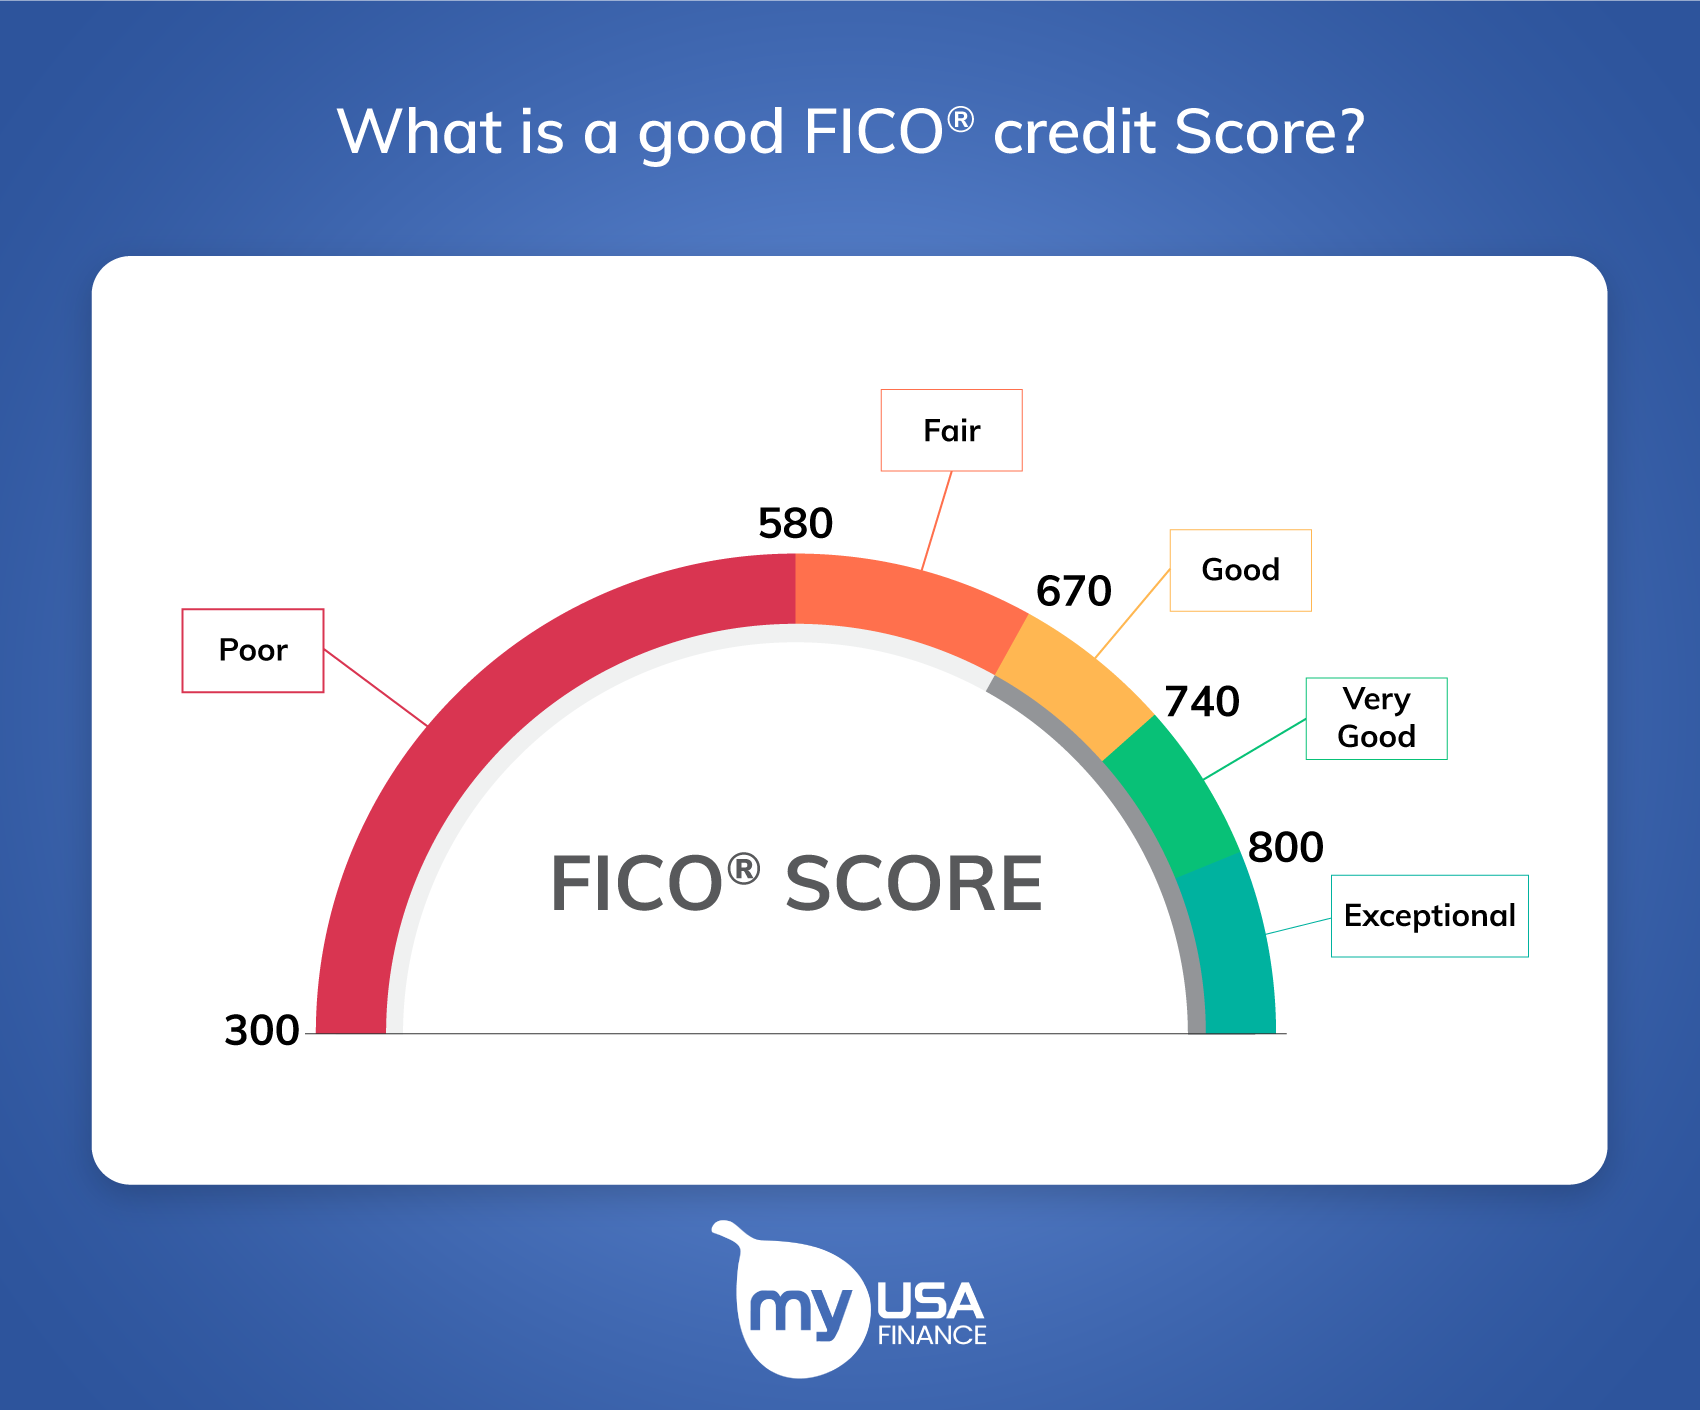 what is a good FICO credit score?